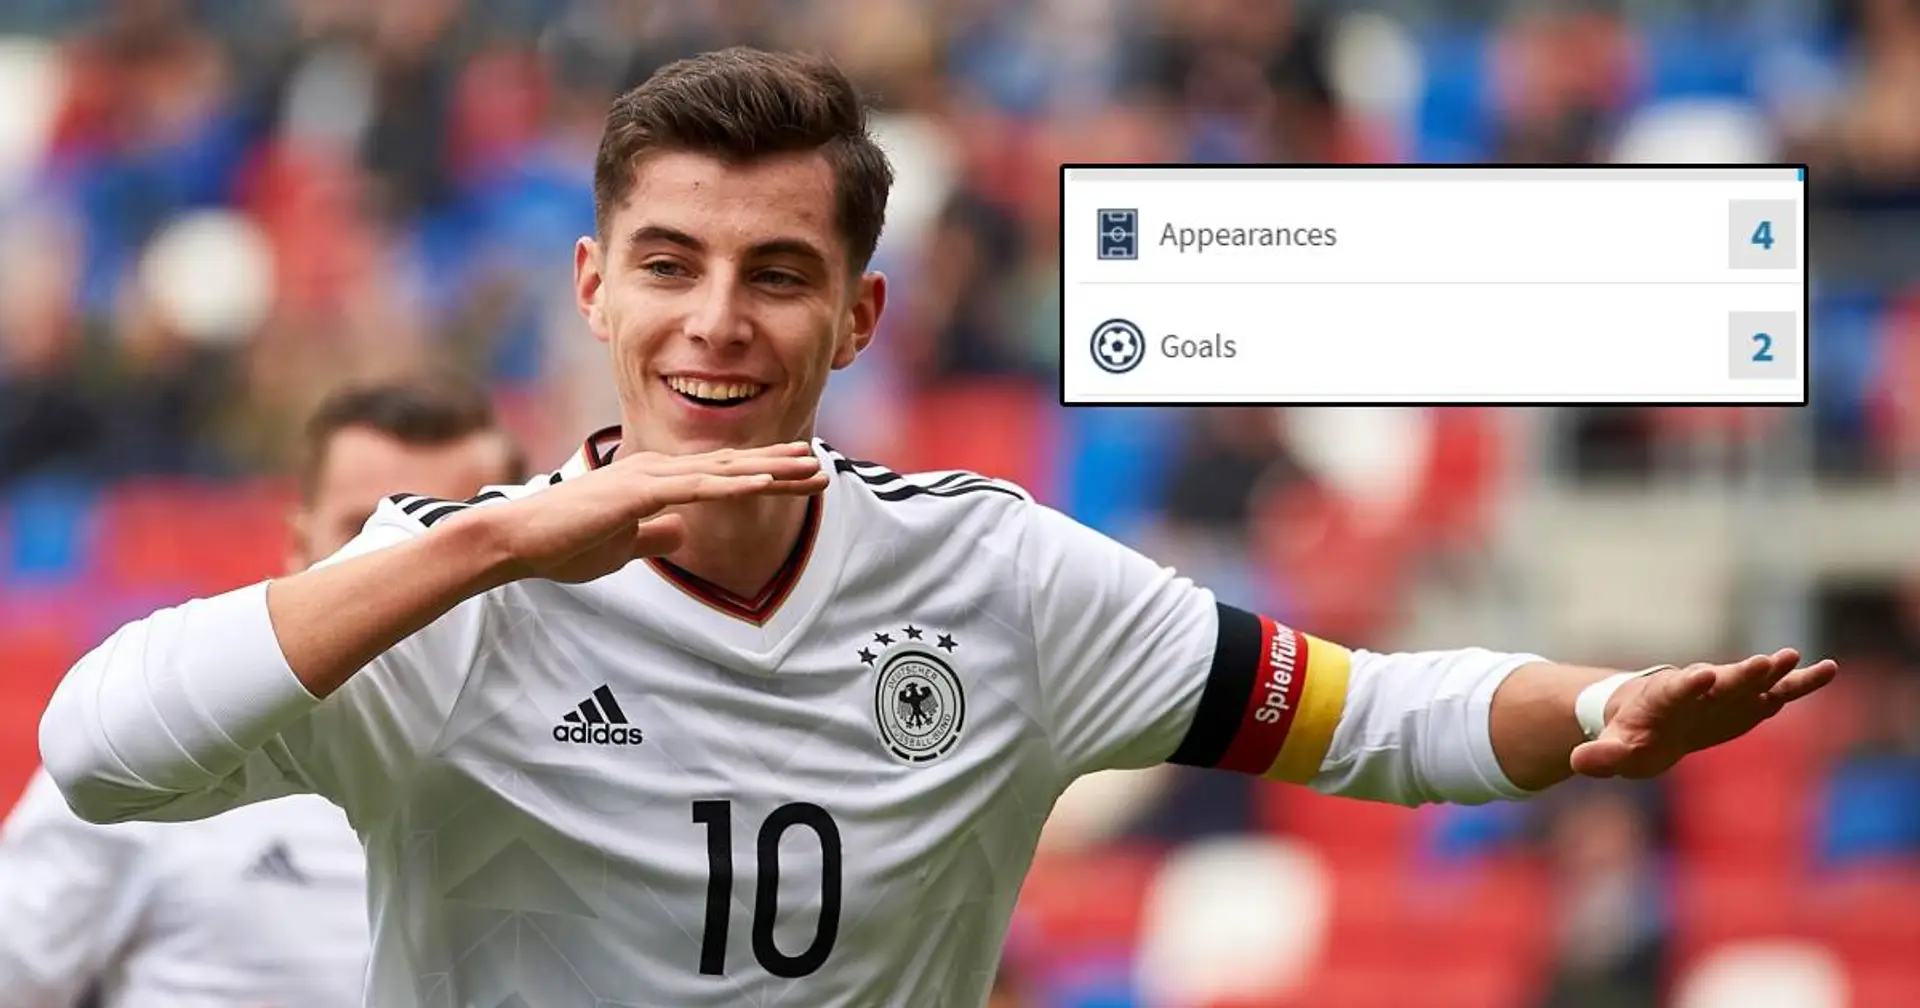 Havertz breakout season coming? German star leads all players at Euro in 1 important stat